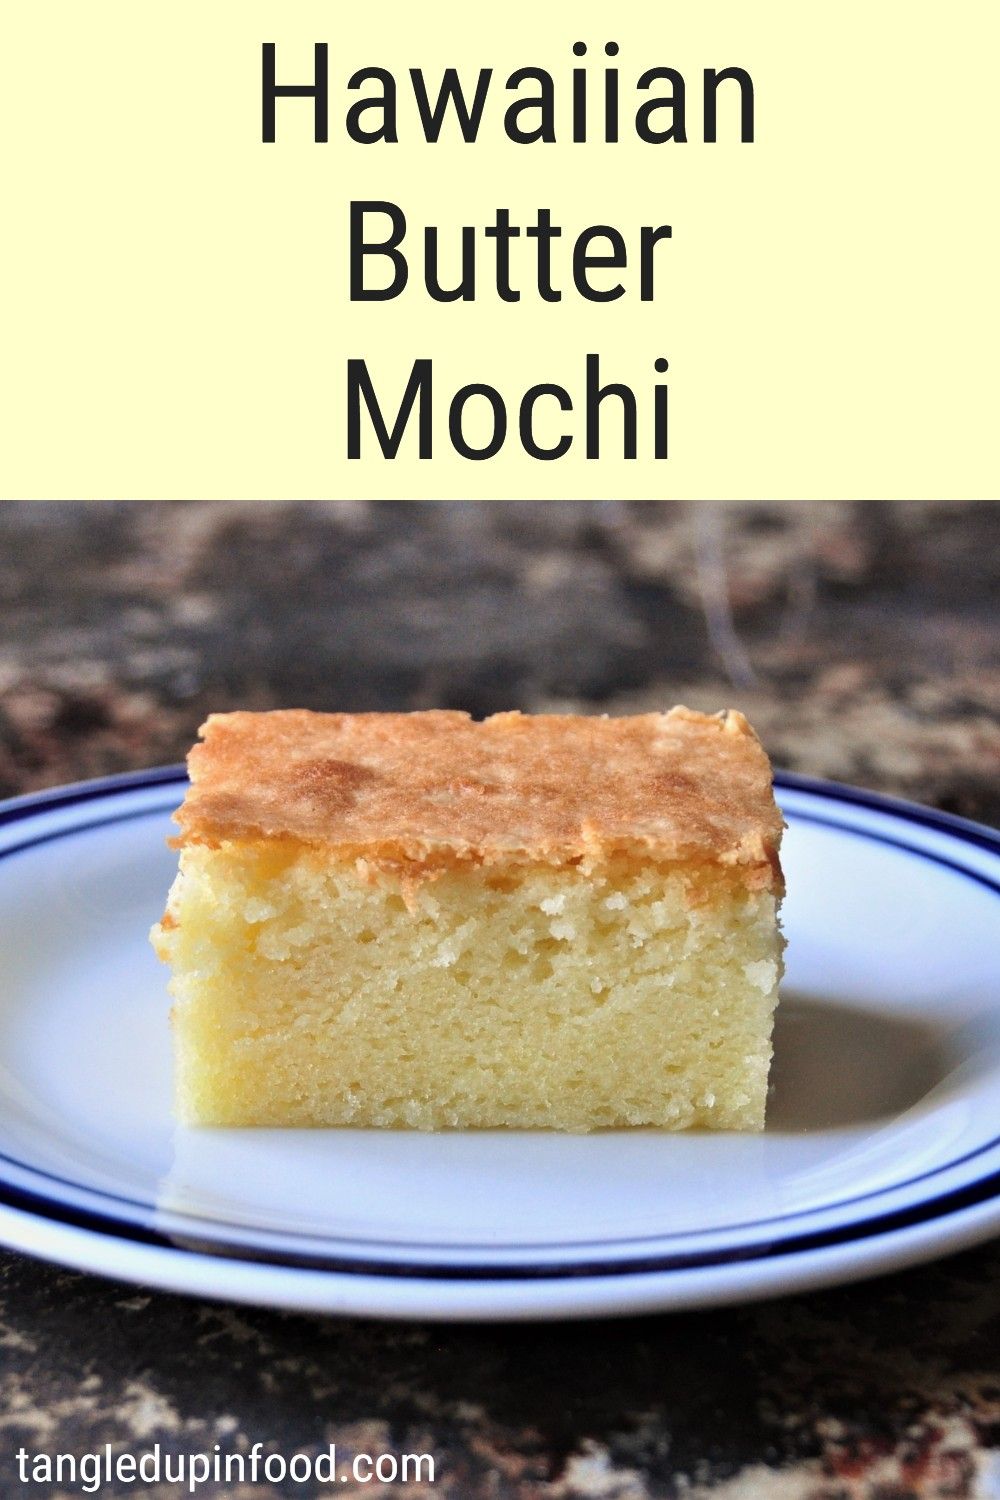 Square slice of Hawaiian butter mochi with text reading "Hawaiian butter mochi"